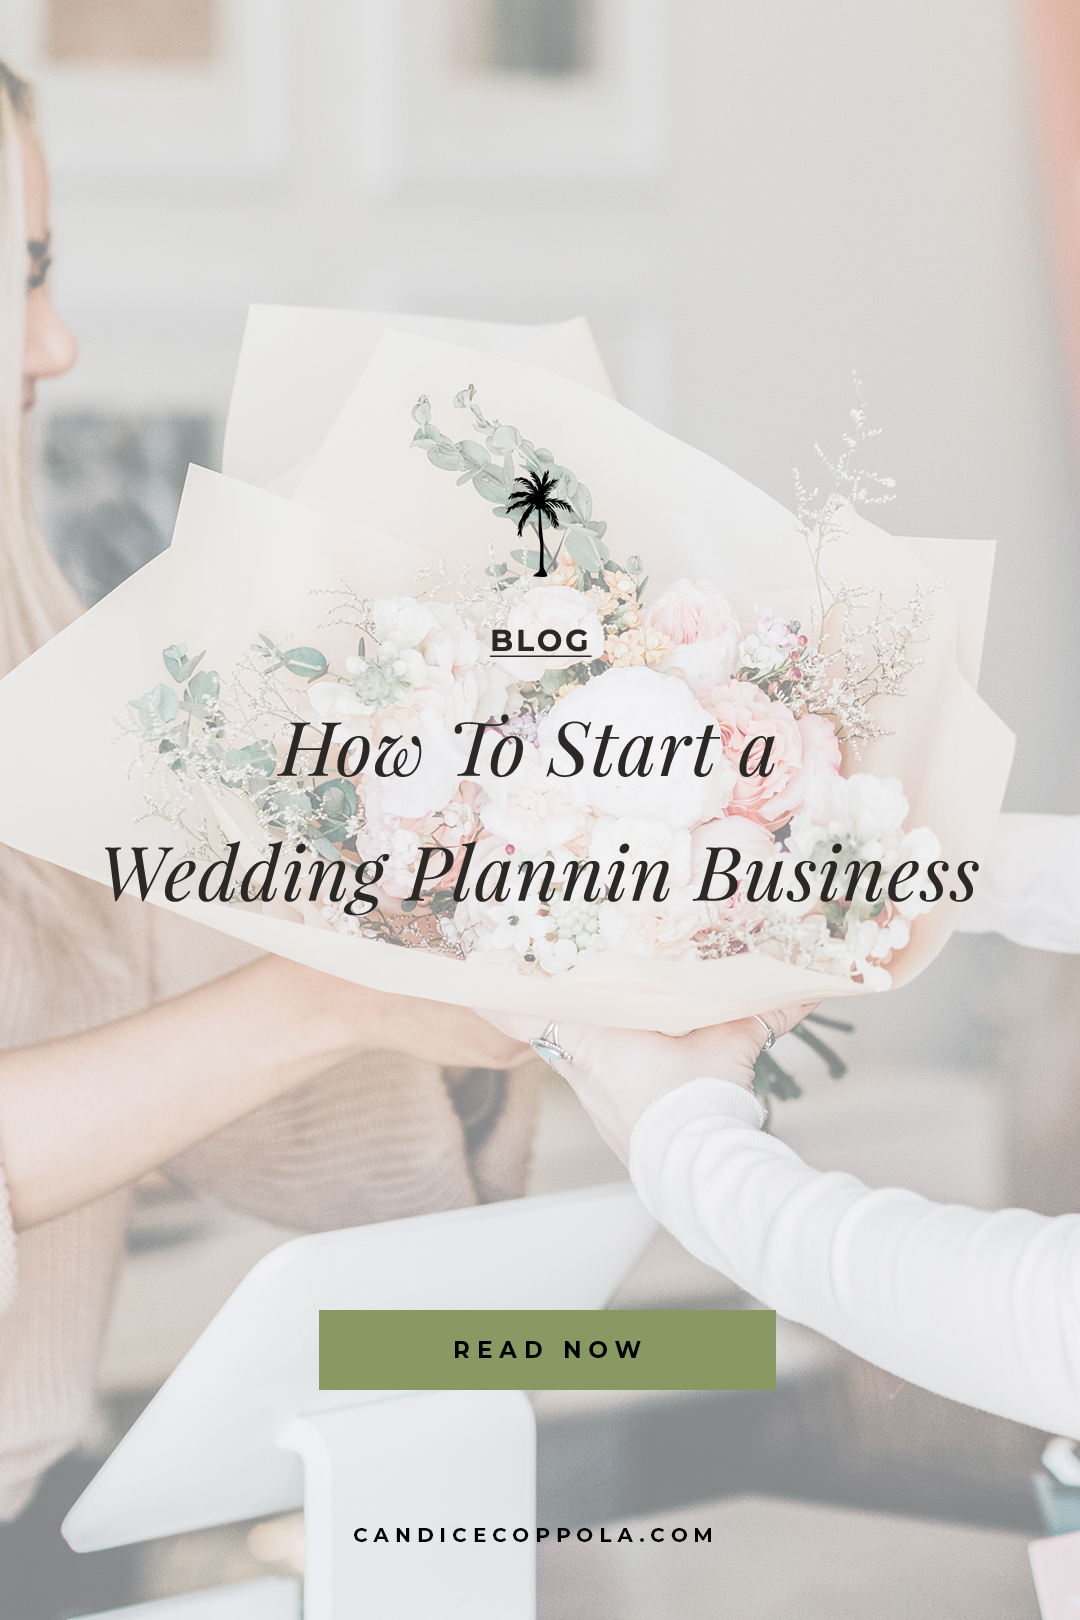 i want to start a wedding planning business